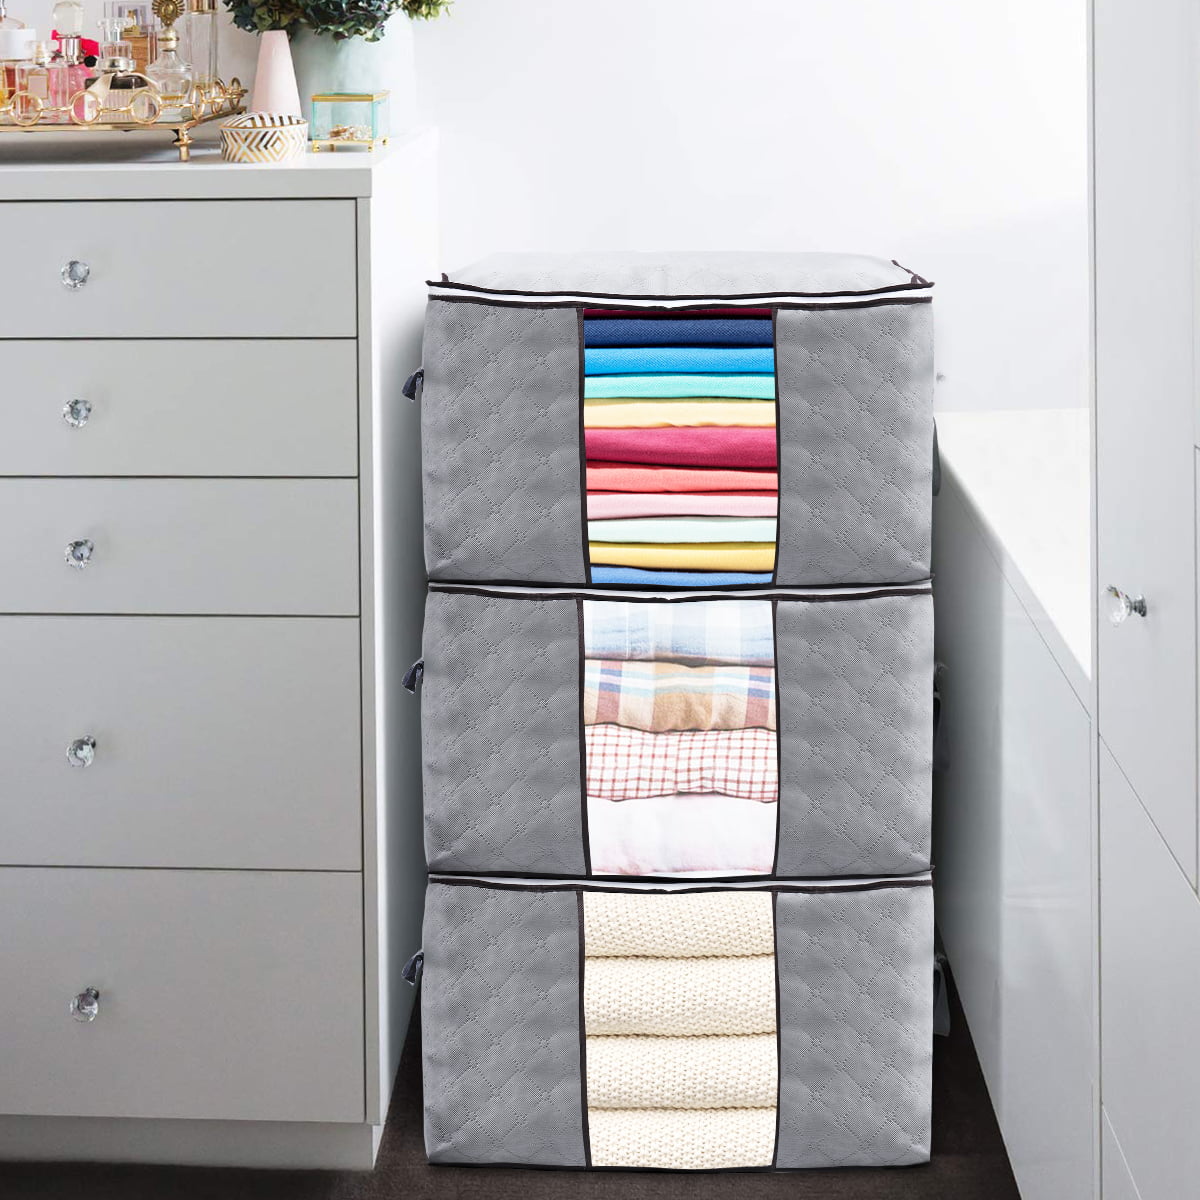 Large Capacity Clothes Quilt Storage Bag Organizer with Handle Clear Window  Sturdy Zipper for Comforters Blankets Bedding Clothes Only $5.99 PatPat US  Mobile